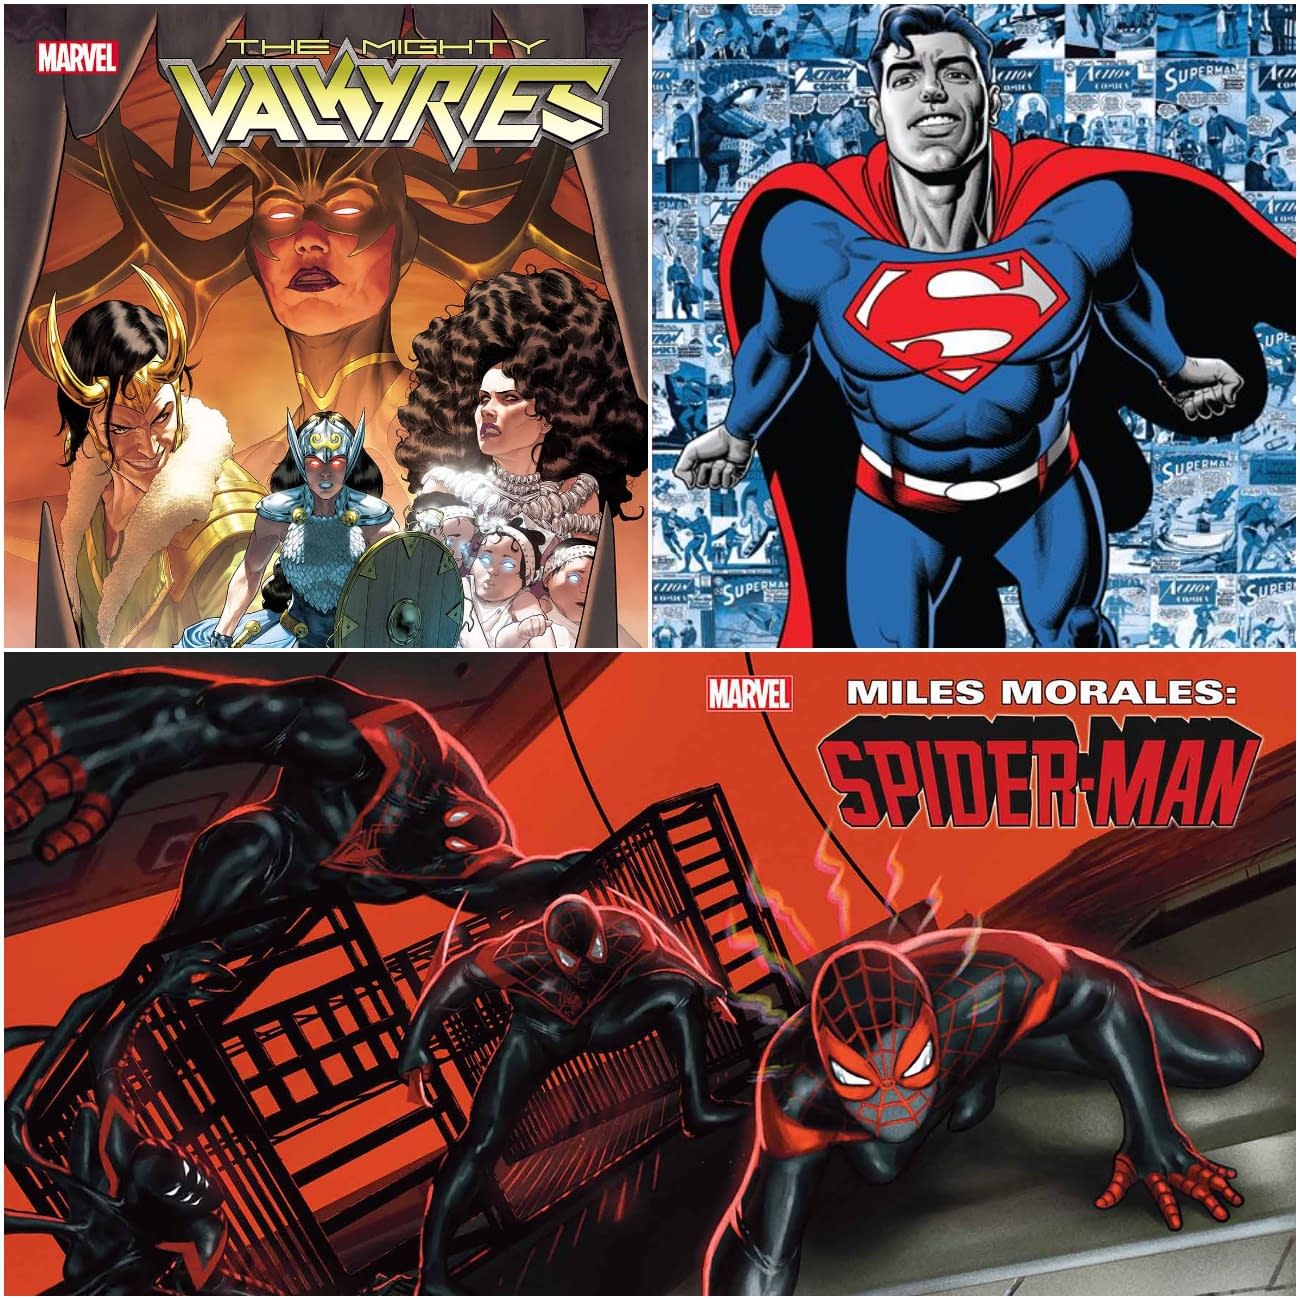 Marvel/DC Comics Ch-Ch-Changes To Superman, Miles Morales & Valkyries